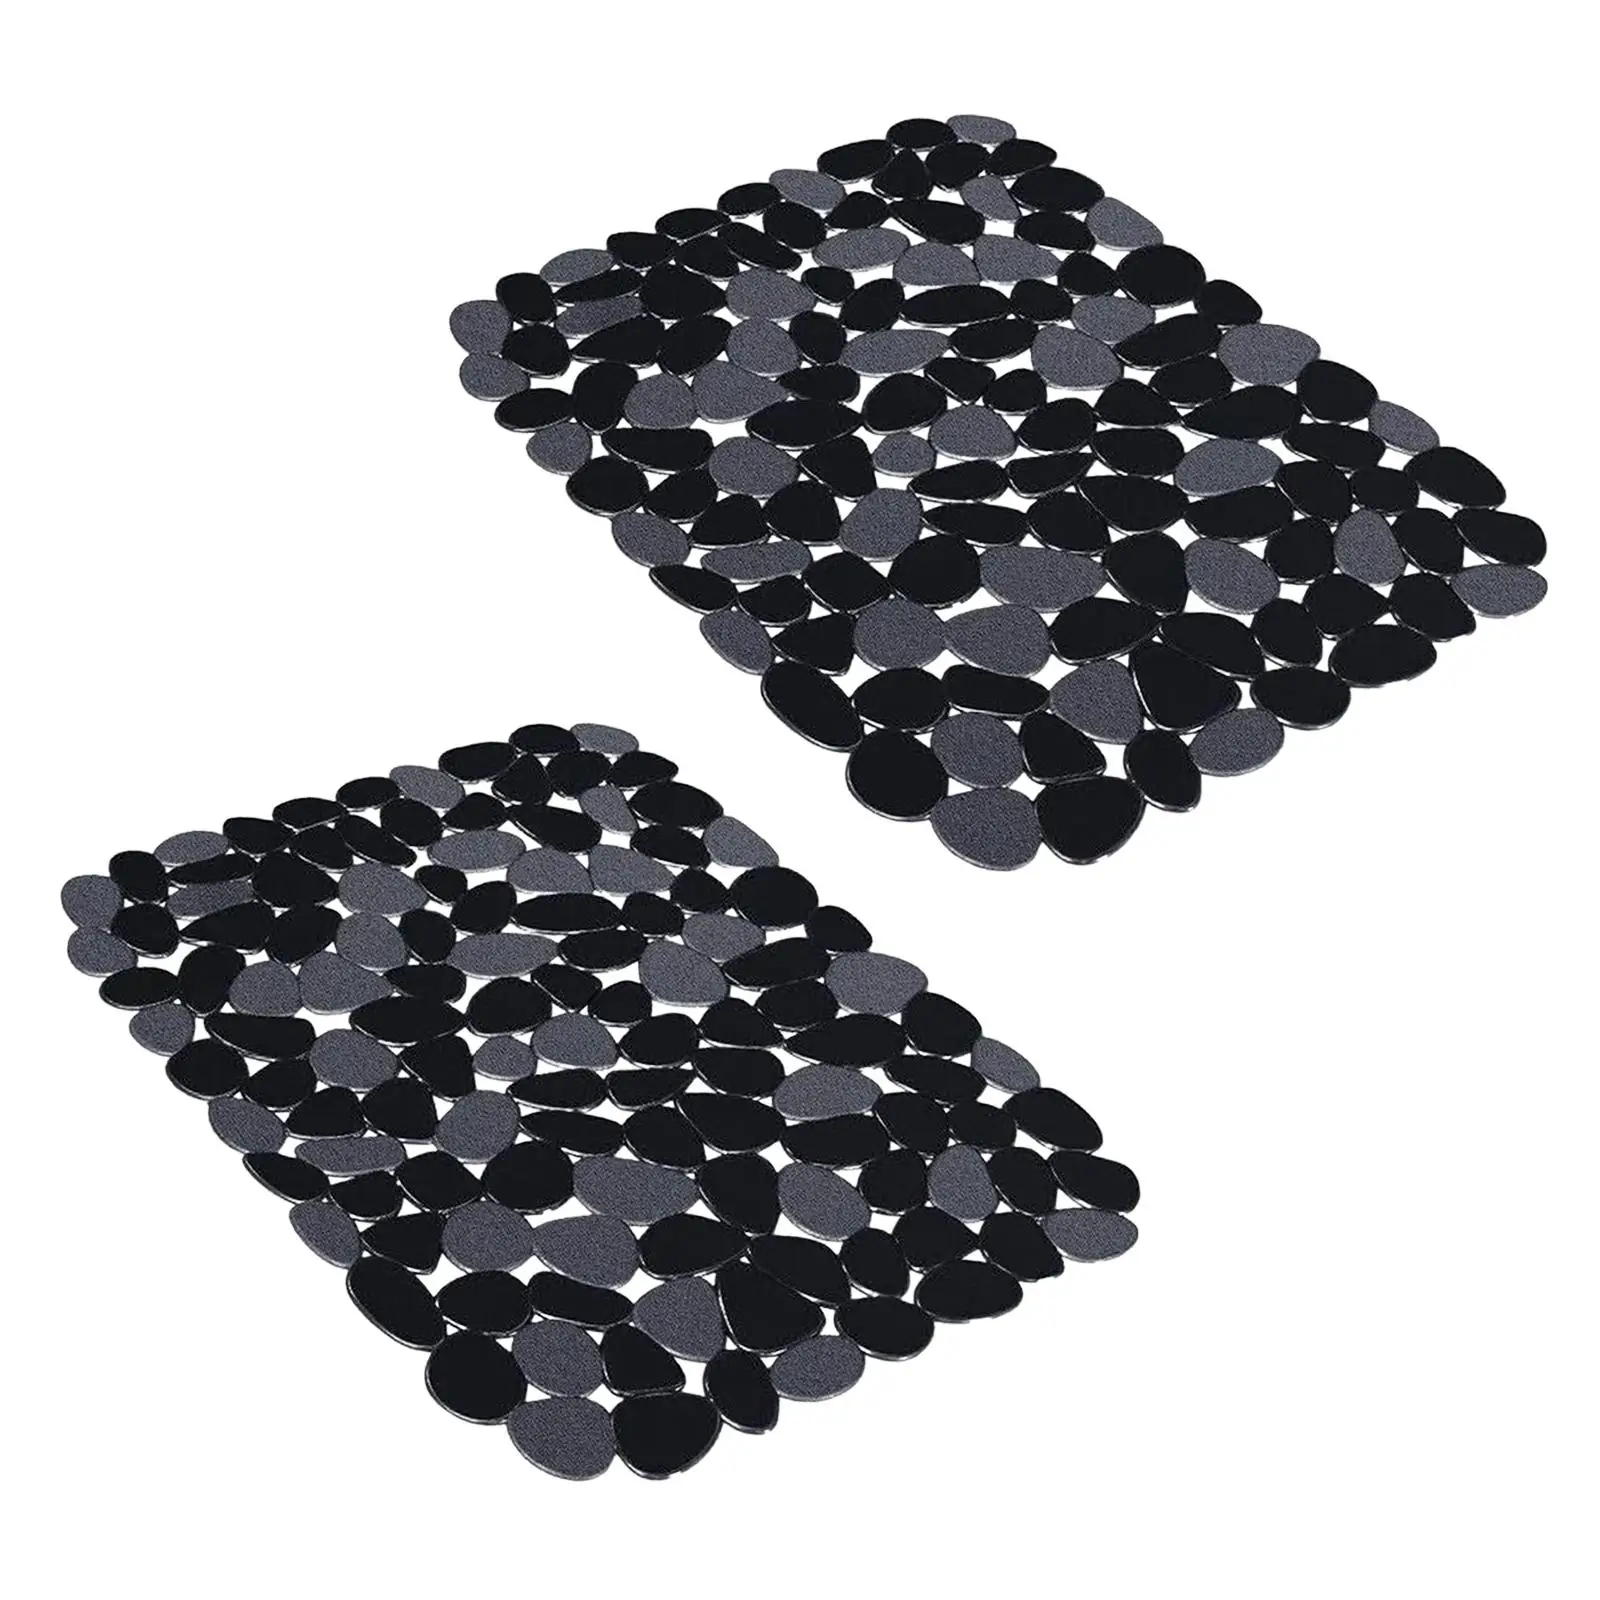 2x Pebble Sink Mat Protective Cover Drainage PVC Sink Mat Sink Protector Mat for Glassware Dishes Plates Countertop Stemware